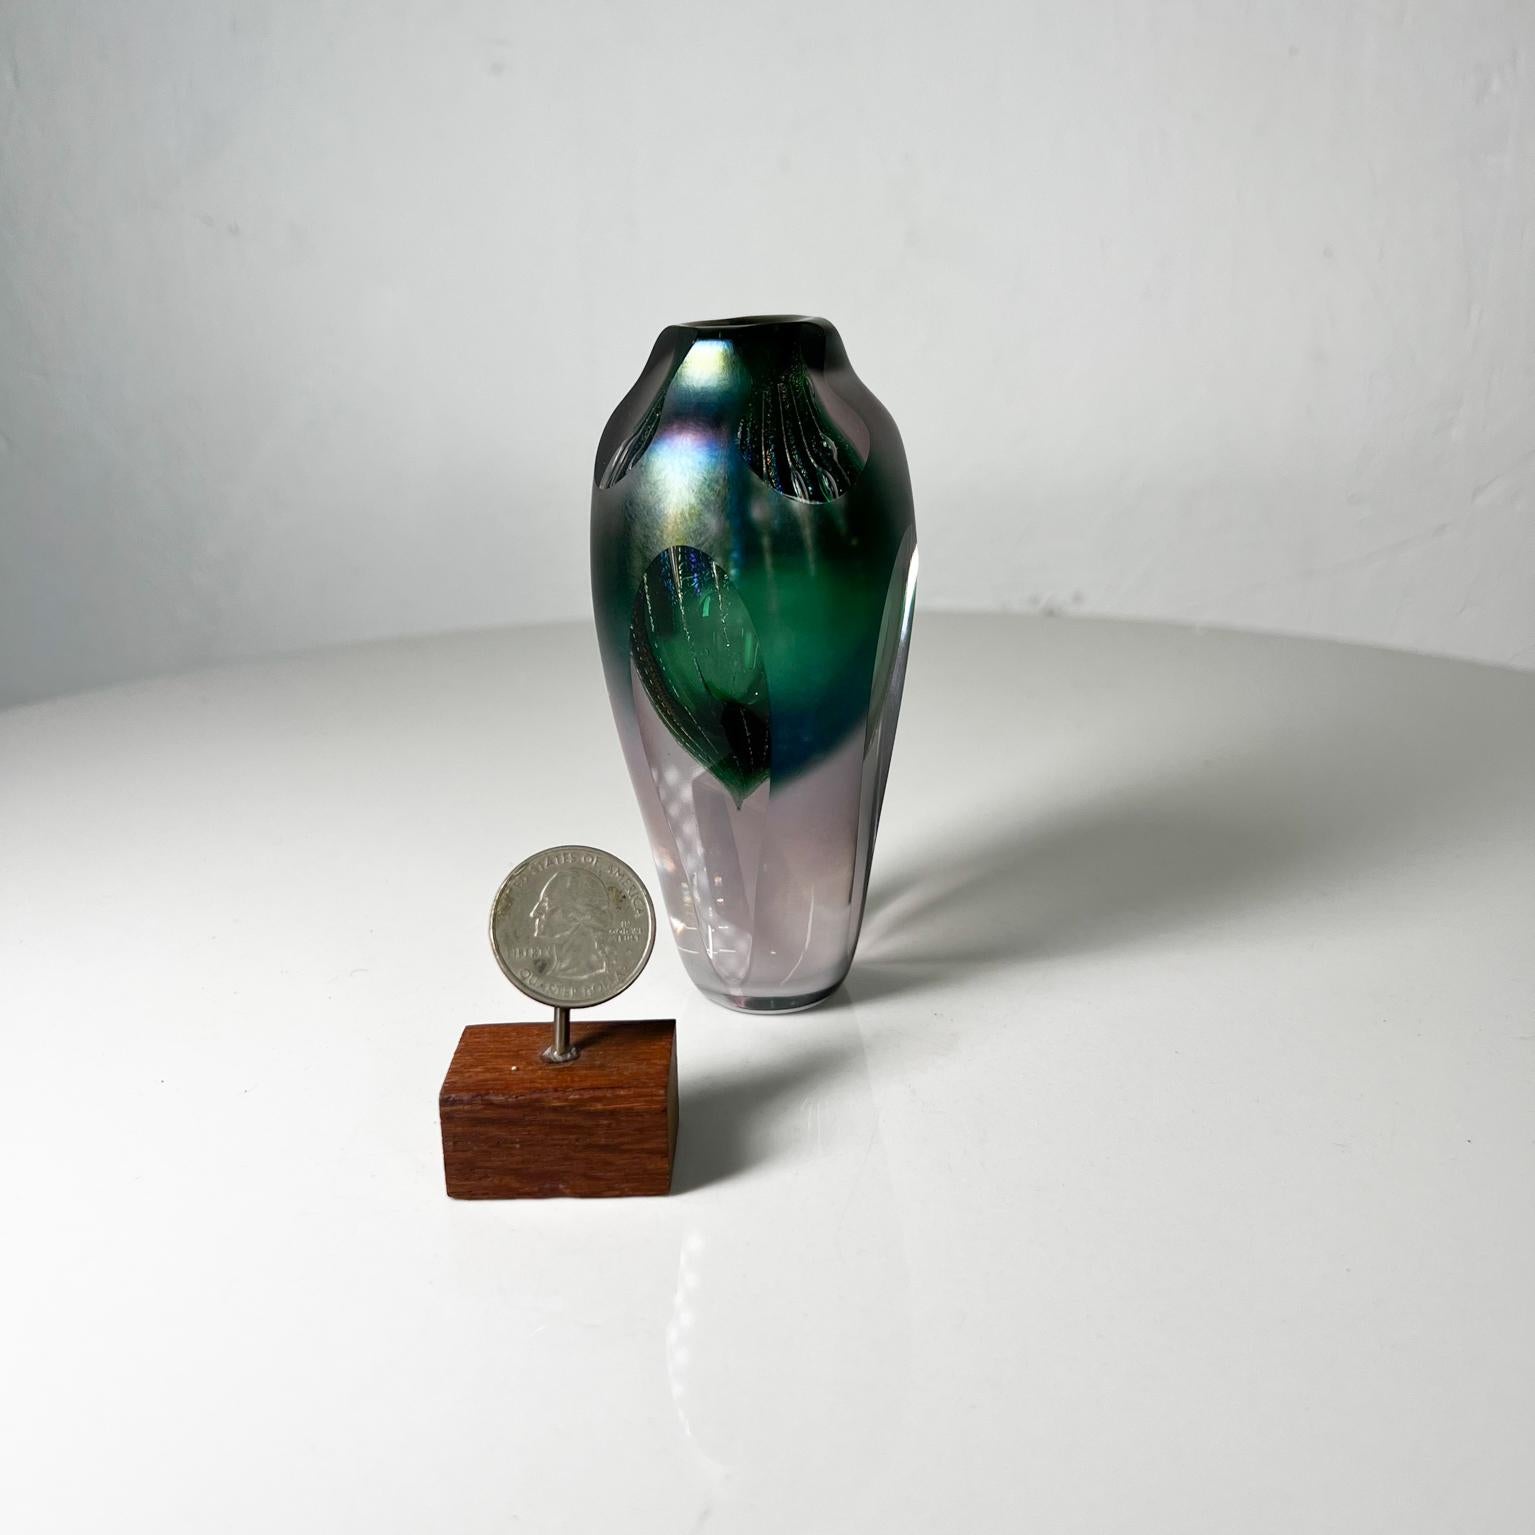 By Brian Maytum Art Glass
Modern Studio Blown Art Glass Vase Green
1989 dated and signed at bottom.
4.38 tall x 2.13 diameter
Preowned original vintage condition.
See all images please.

